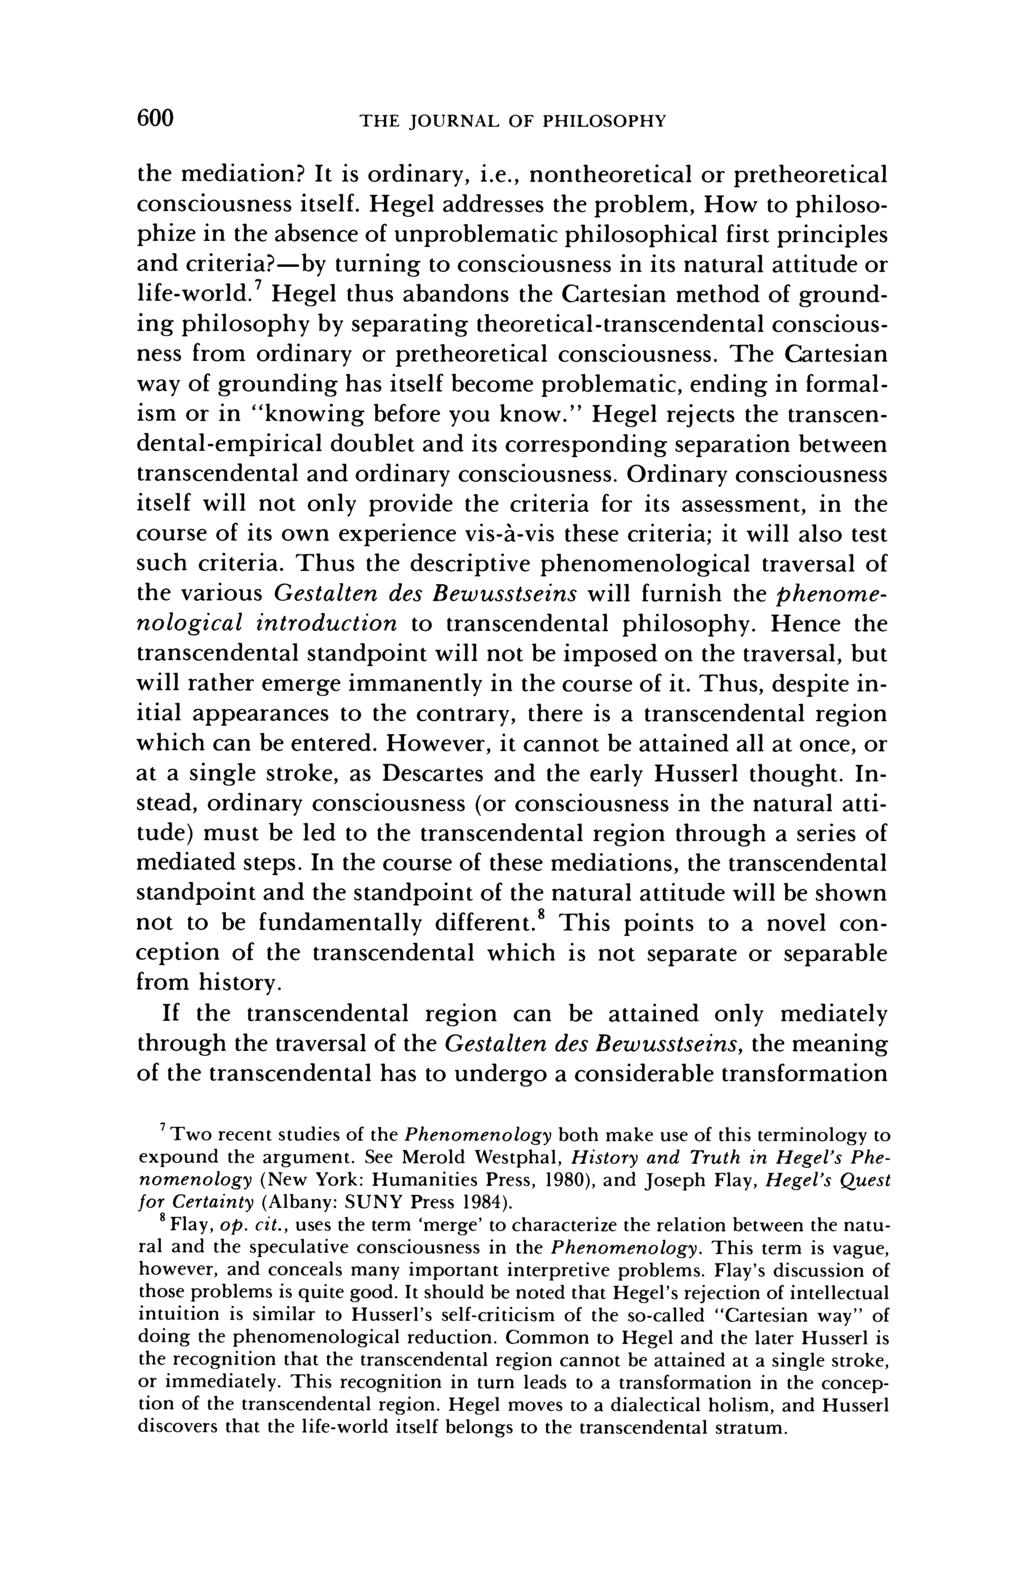 600 THE JOURNAL OF PHILOSOPHY the mediation? It is ordinary, i.e., nontheoretical or pretheoretical consciousness itself.